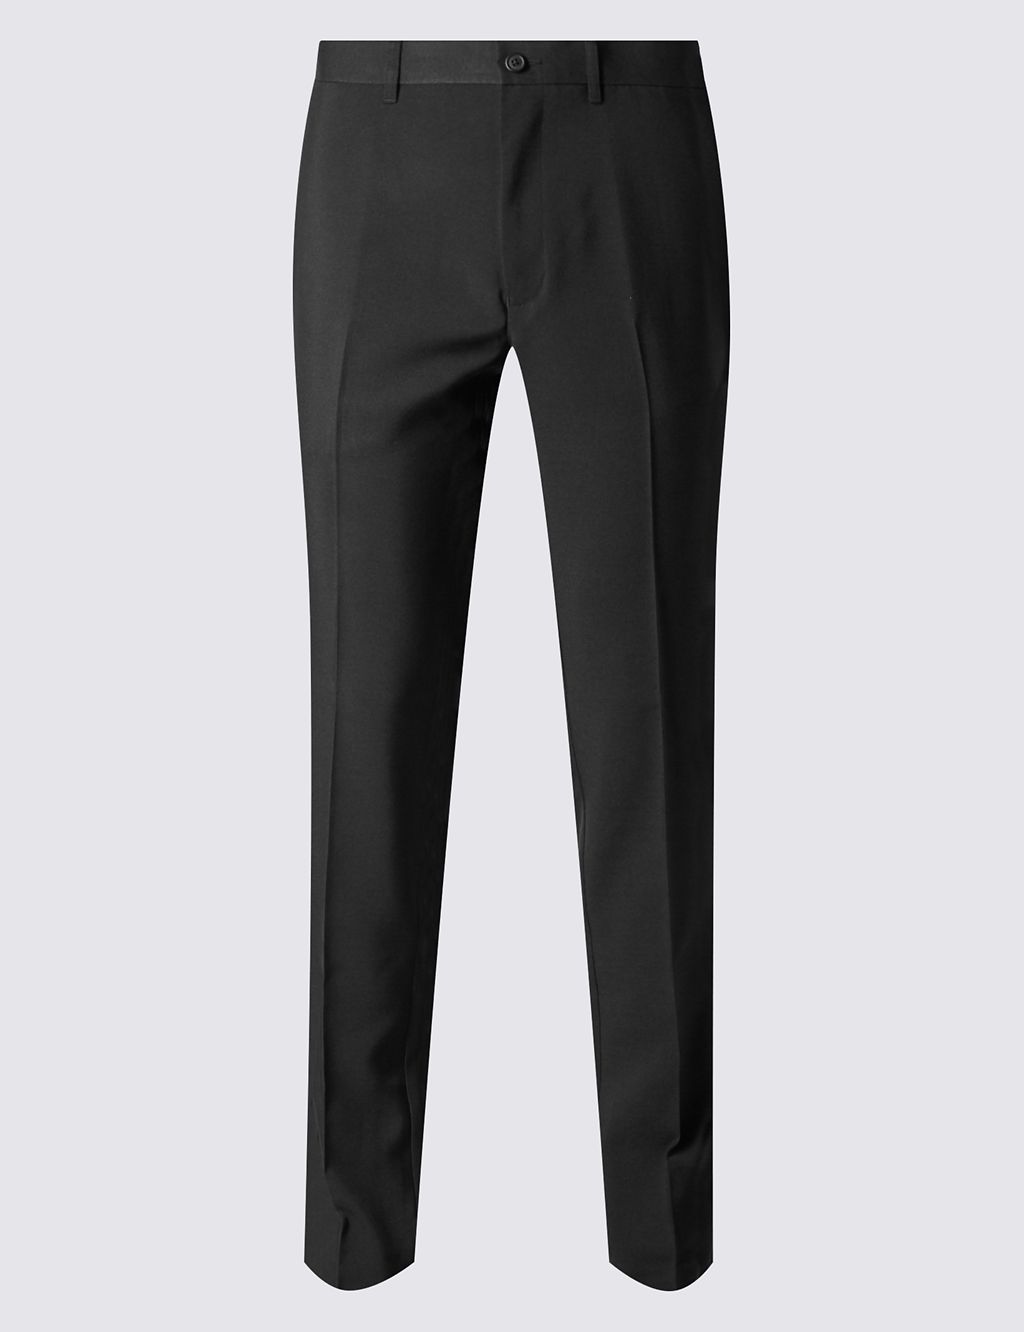 Slim Fit Flat Front Trousers 1 of 3